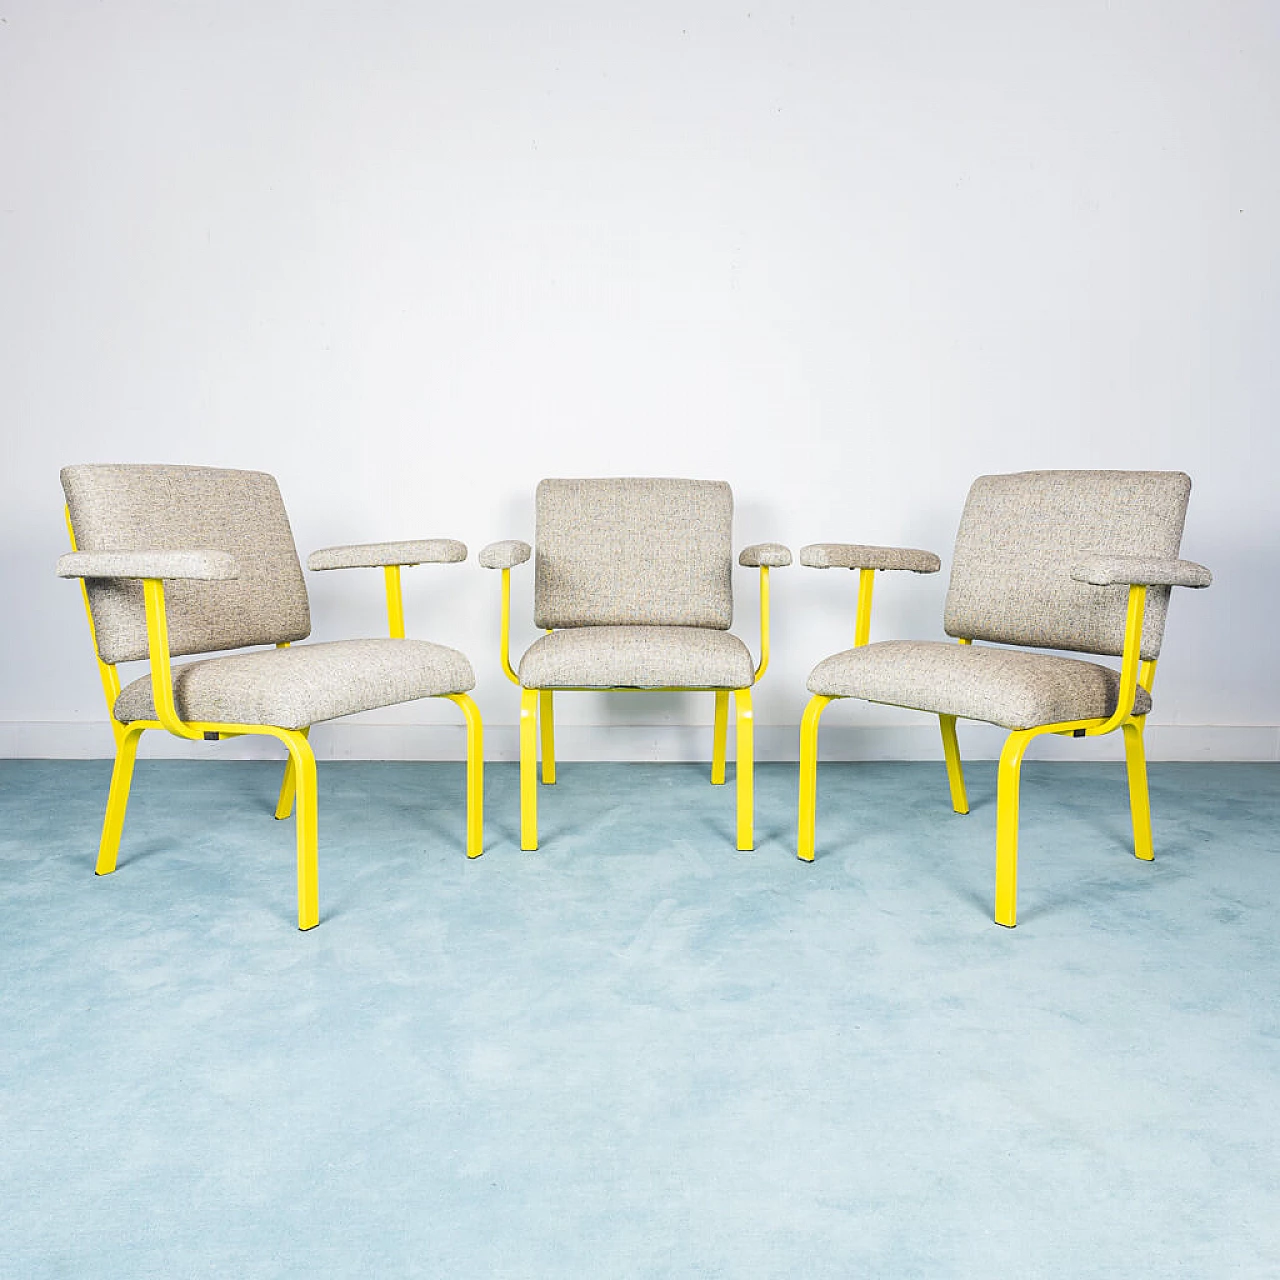 Set of 3 handcrafted chairs in yellow metal and gray fabric, 70s 1207080